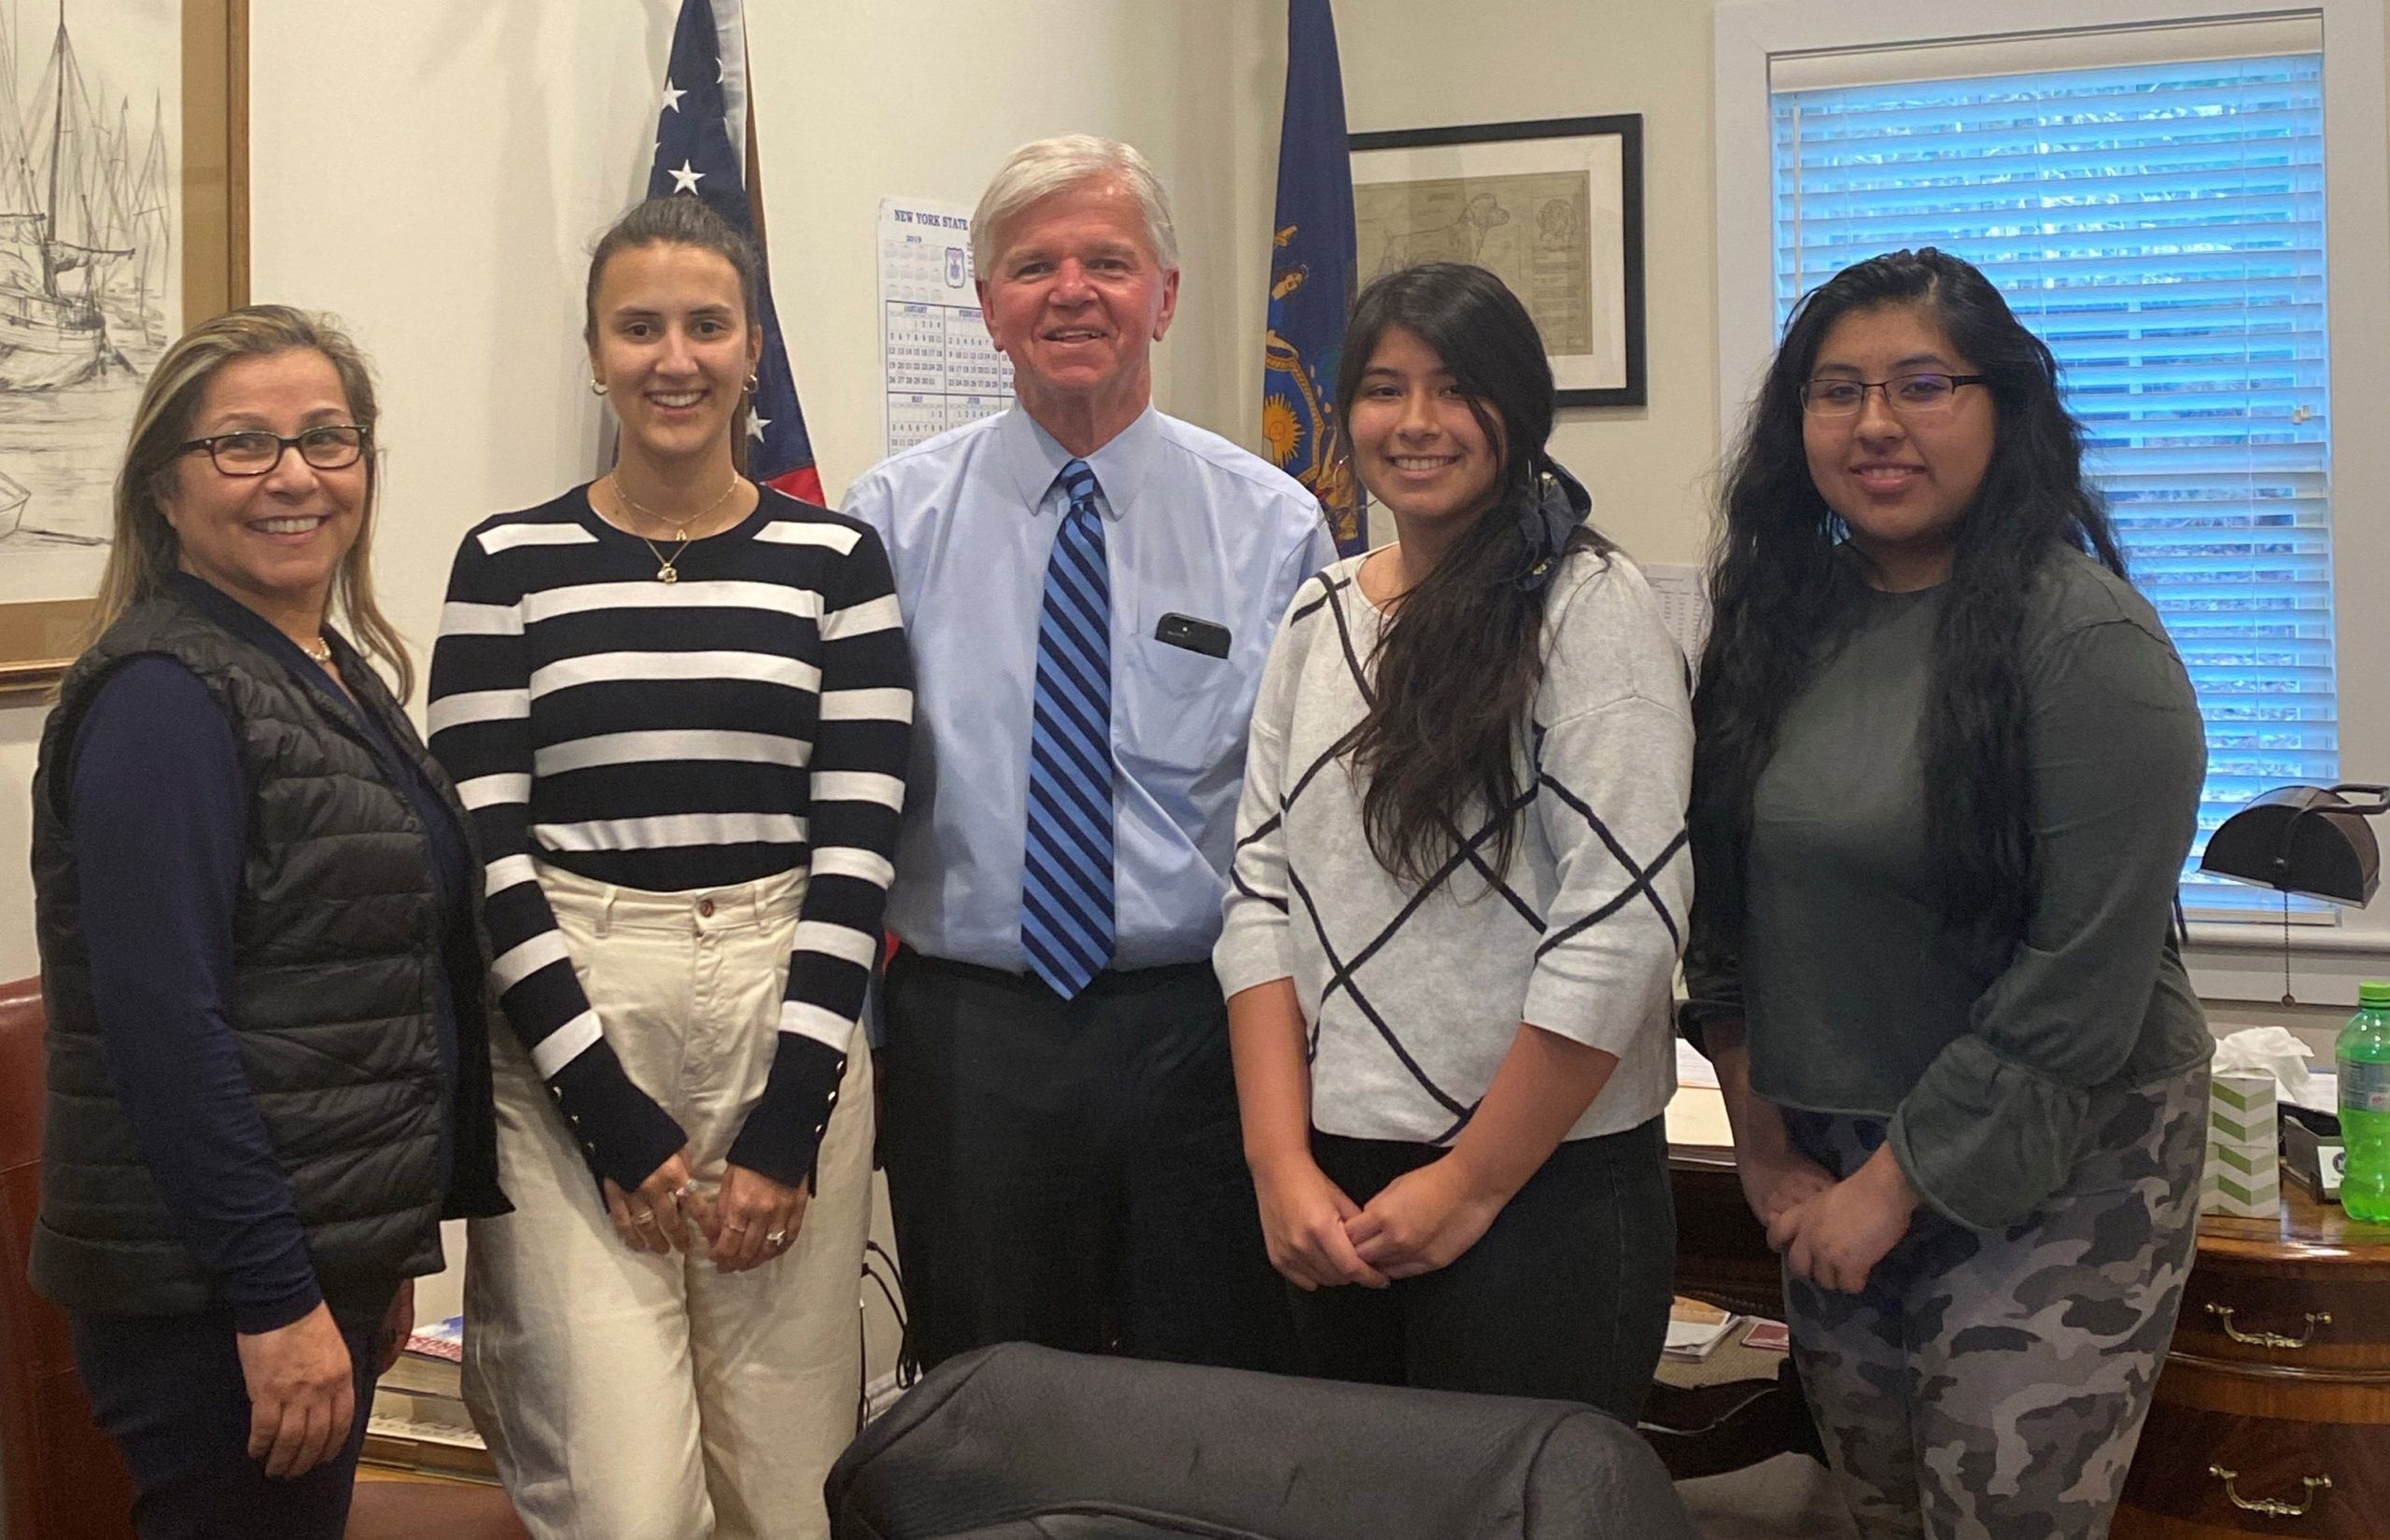 Assemblyman Fred W. Thiele Jr. welcomed students who were selected to participate in the Angelo Del Toro Puerto Rican/Hispanic Youth Leadership Institute and will be traveling to Albany on March 9 to participate in a legislative mock session. From left, Isabel Sepúlveda-de Scanlon, Southampton Community Liaison;, Alazne Betolaza Salazar; Mr. Thiele; Katherine Ordonez and Citlalli Chino, both students at Southampton High School.